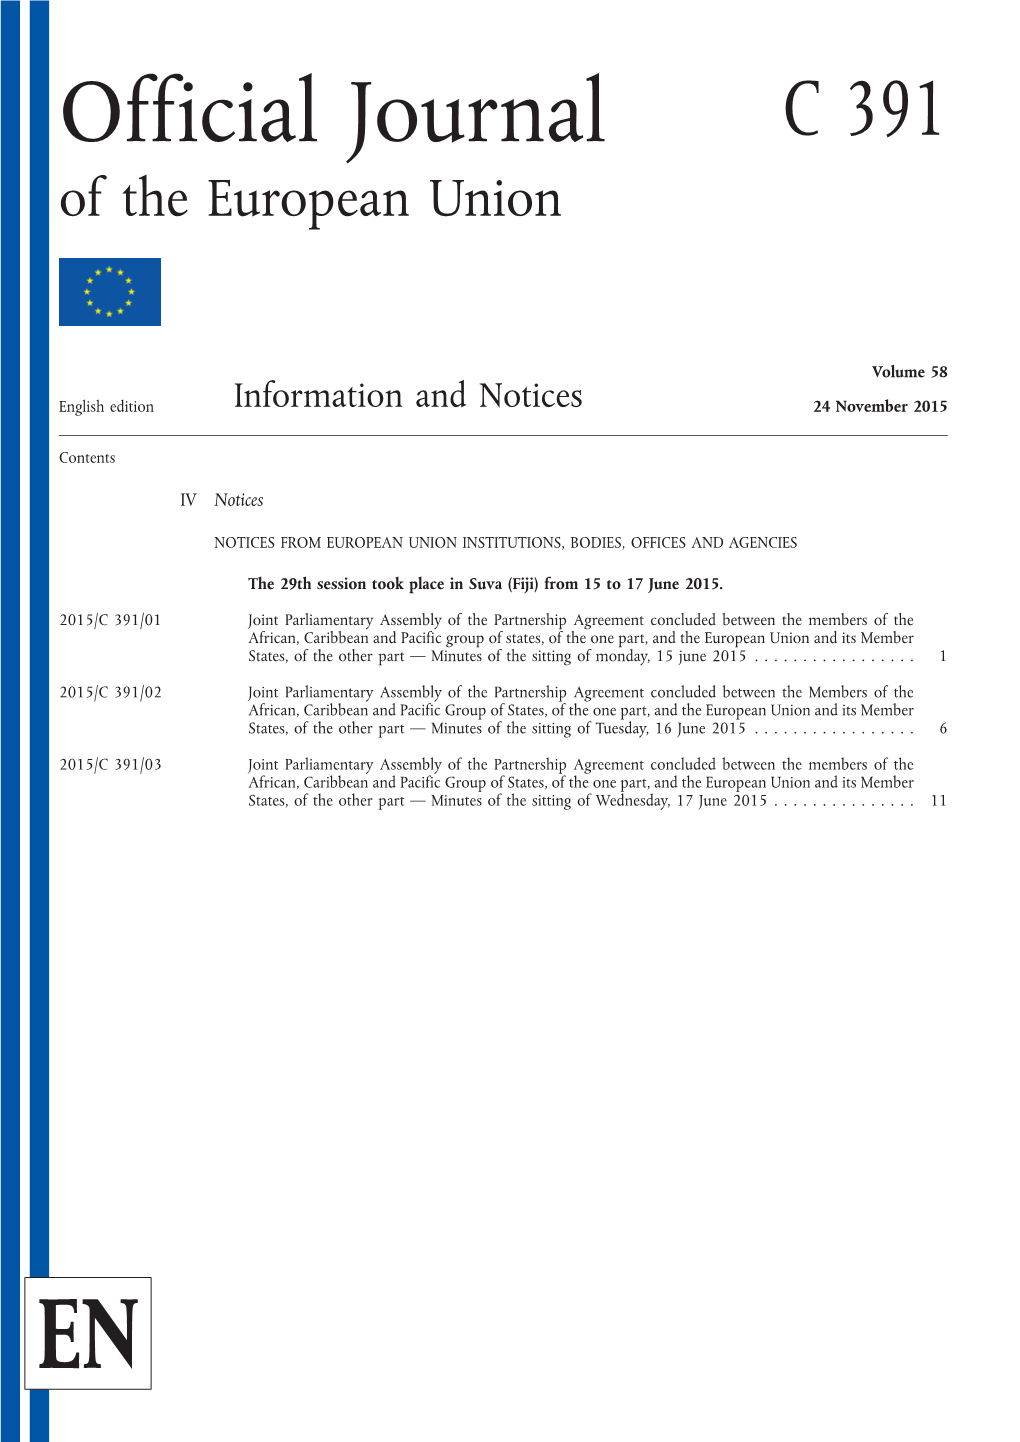 Official Journal of the European Union C 391/1